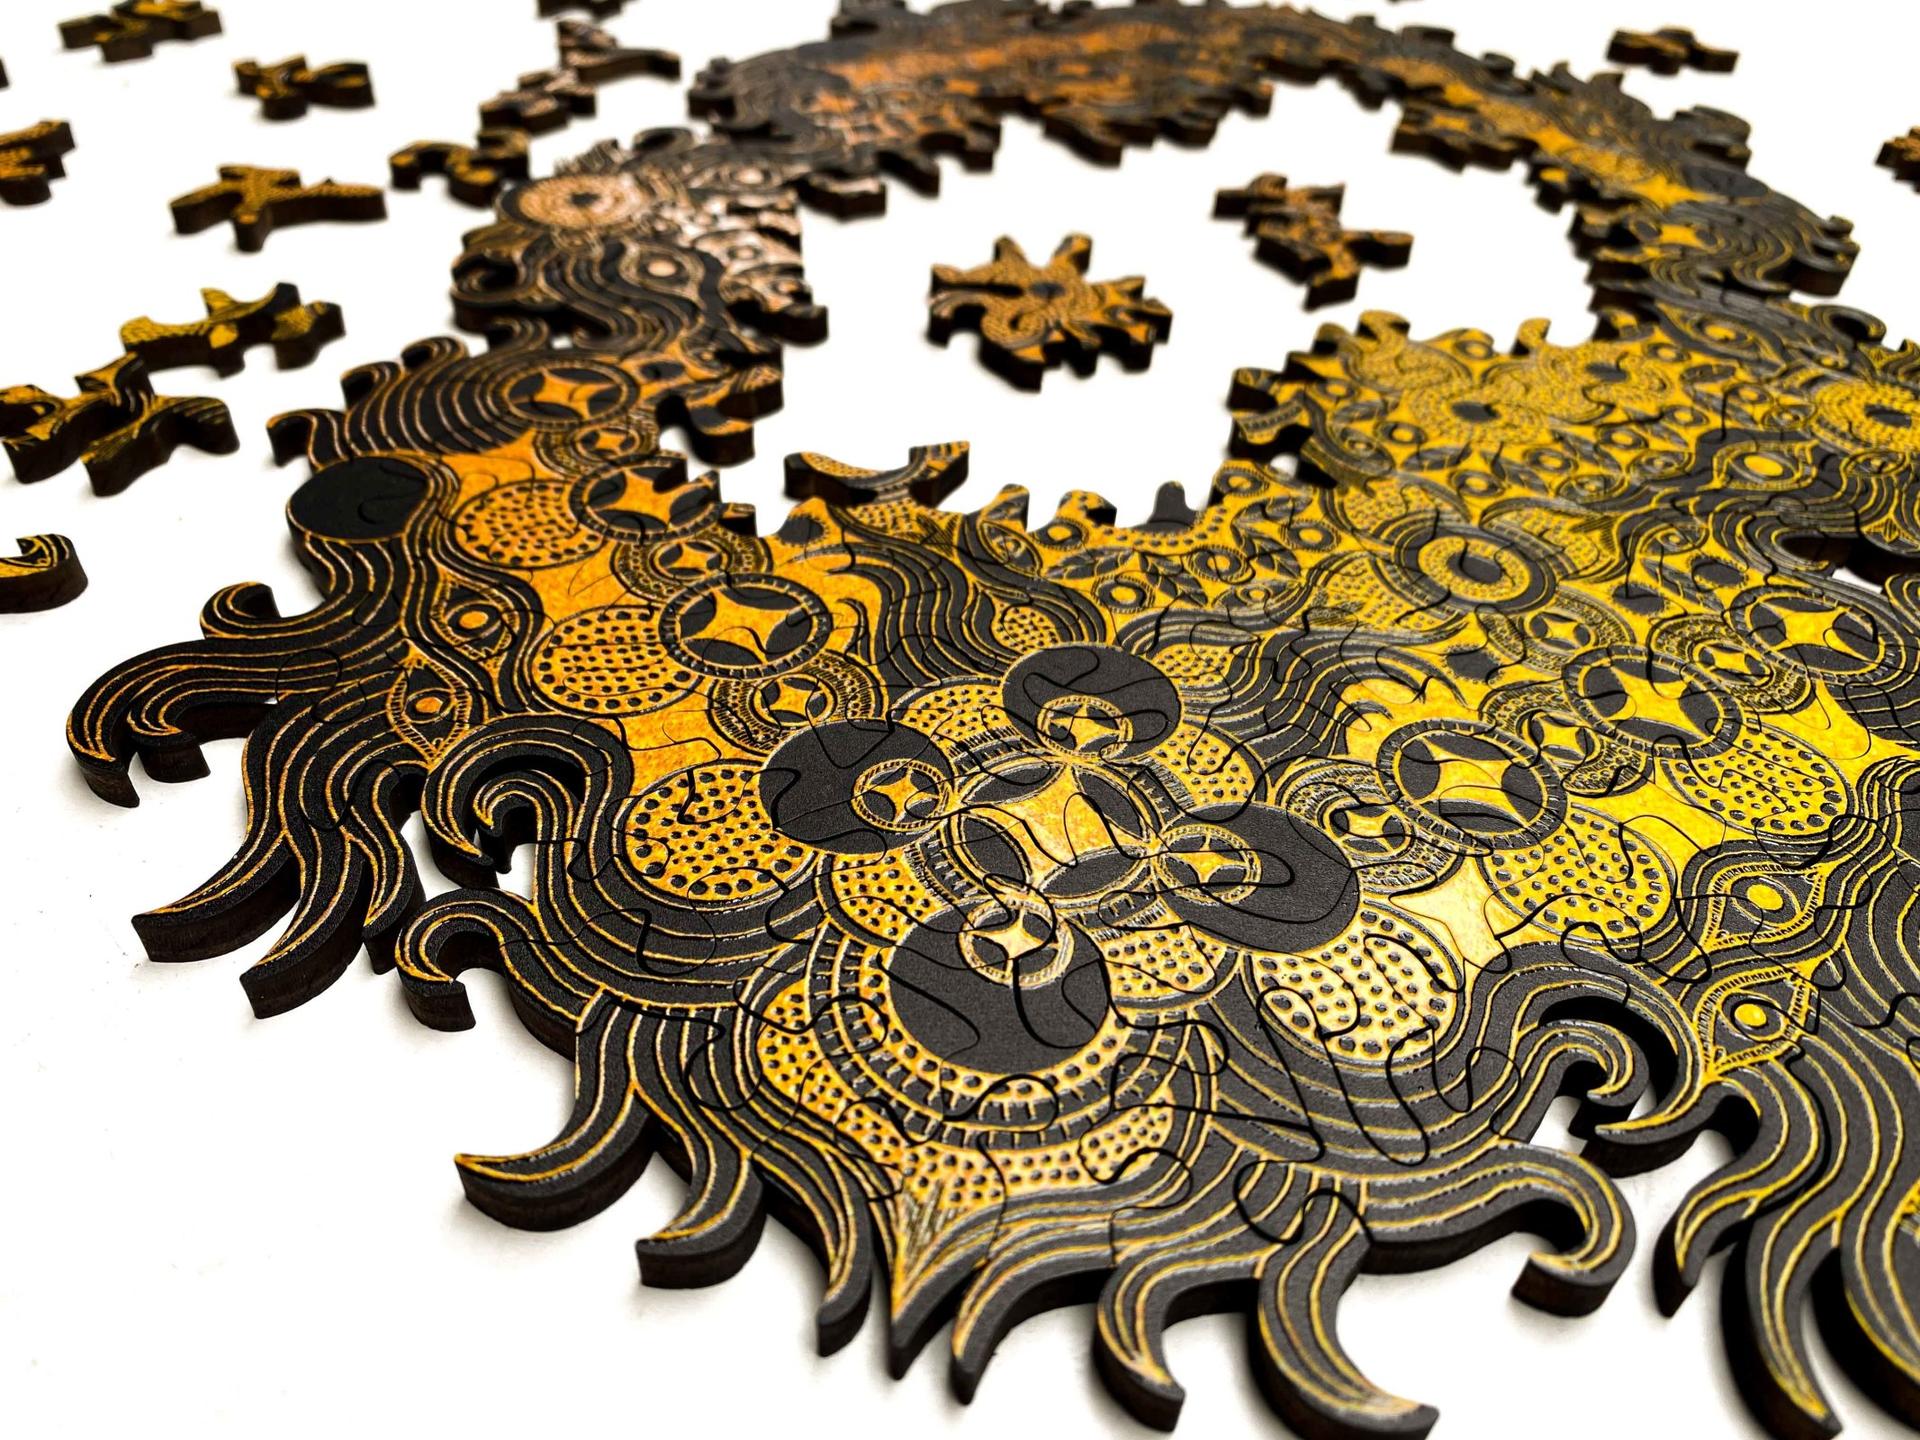 A deconstructed golden mandala puzzle from Puzzle Lab